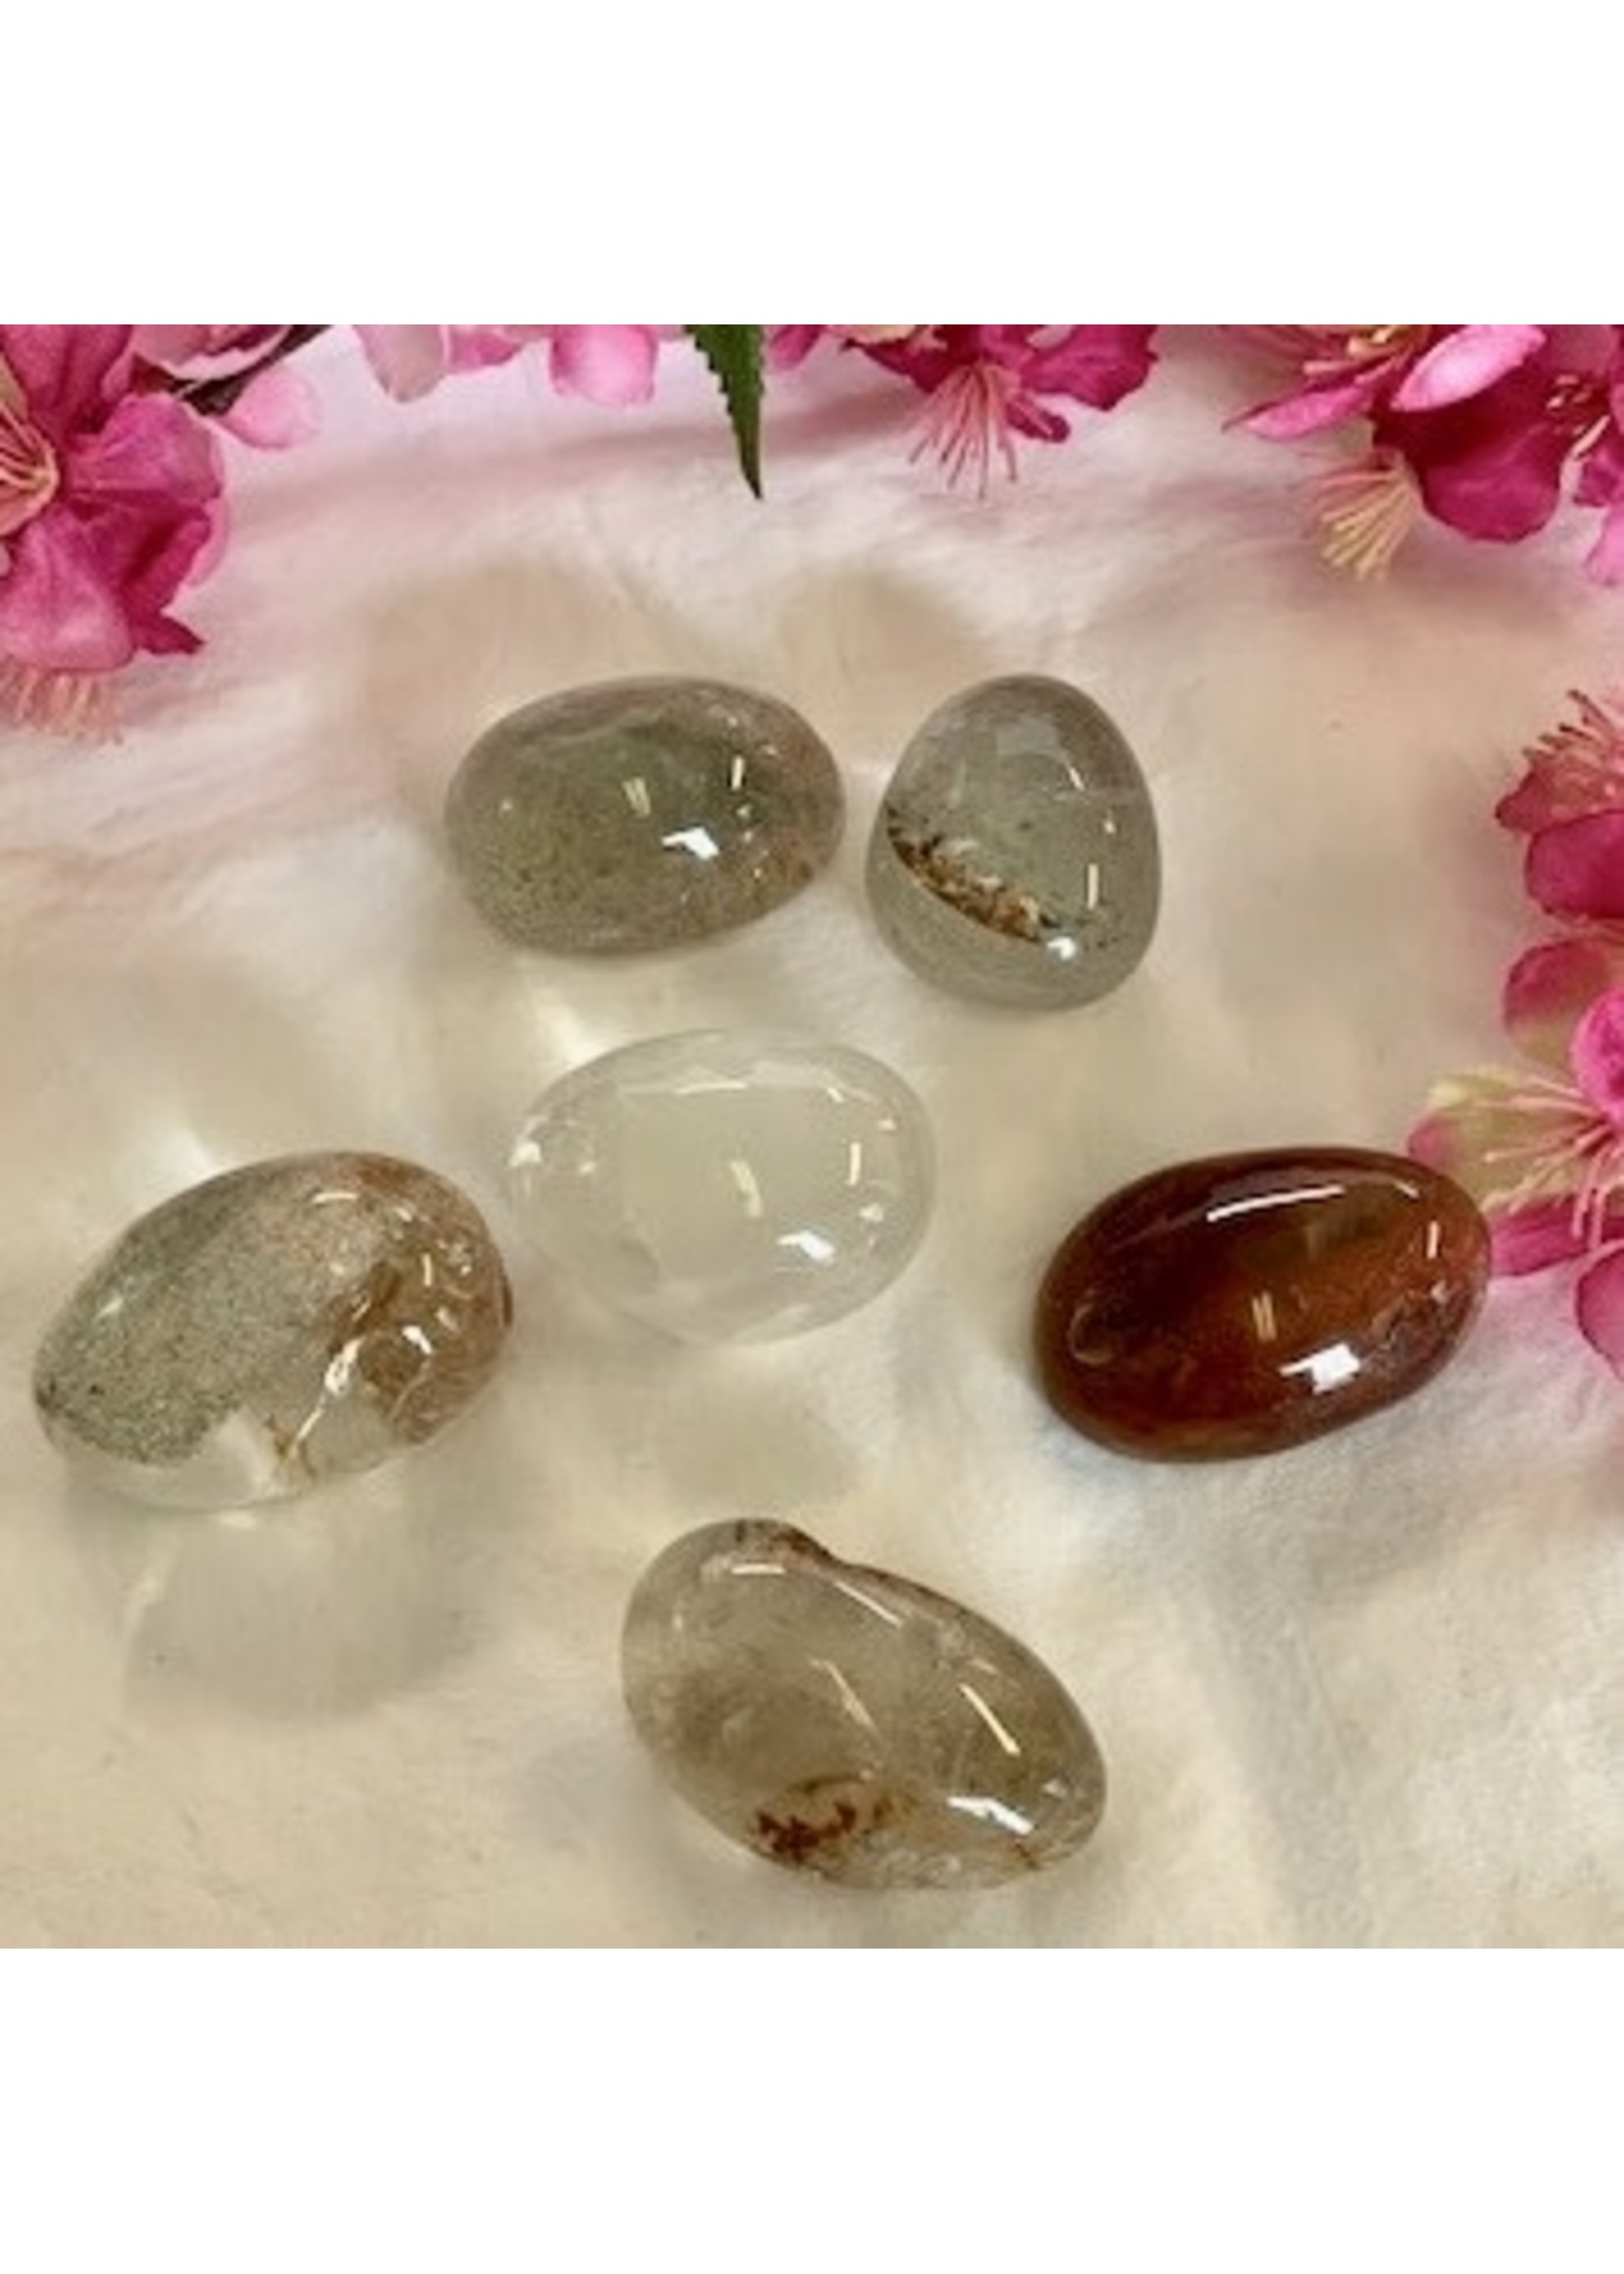 Shaman Dream Stones (Lodolite)  for dreaming and journeying